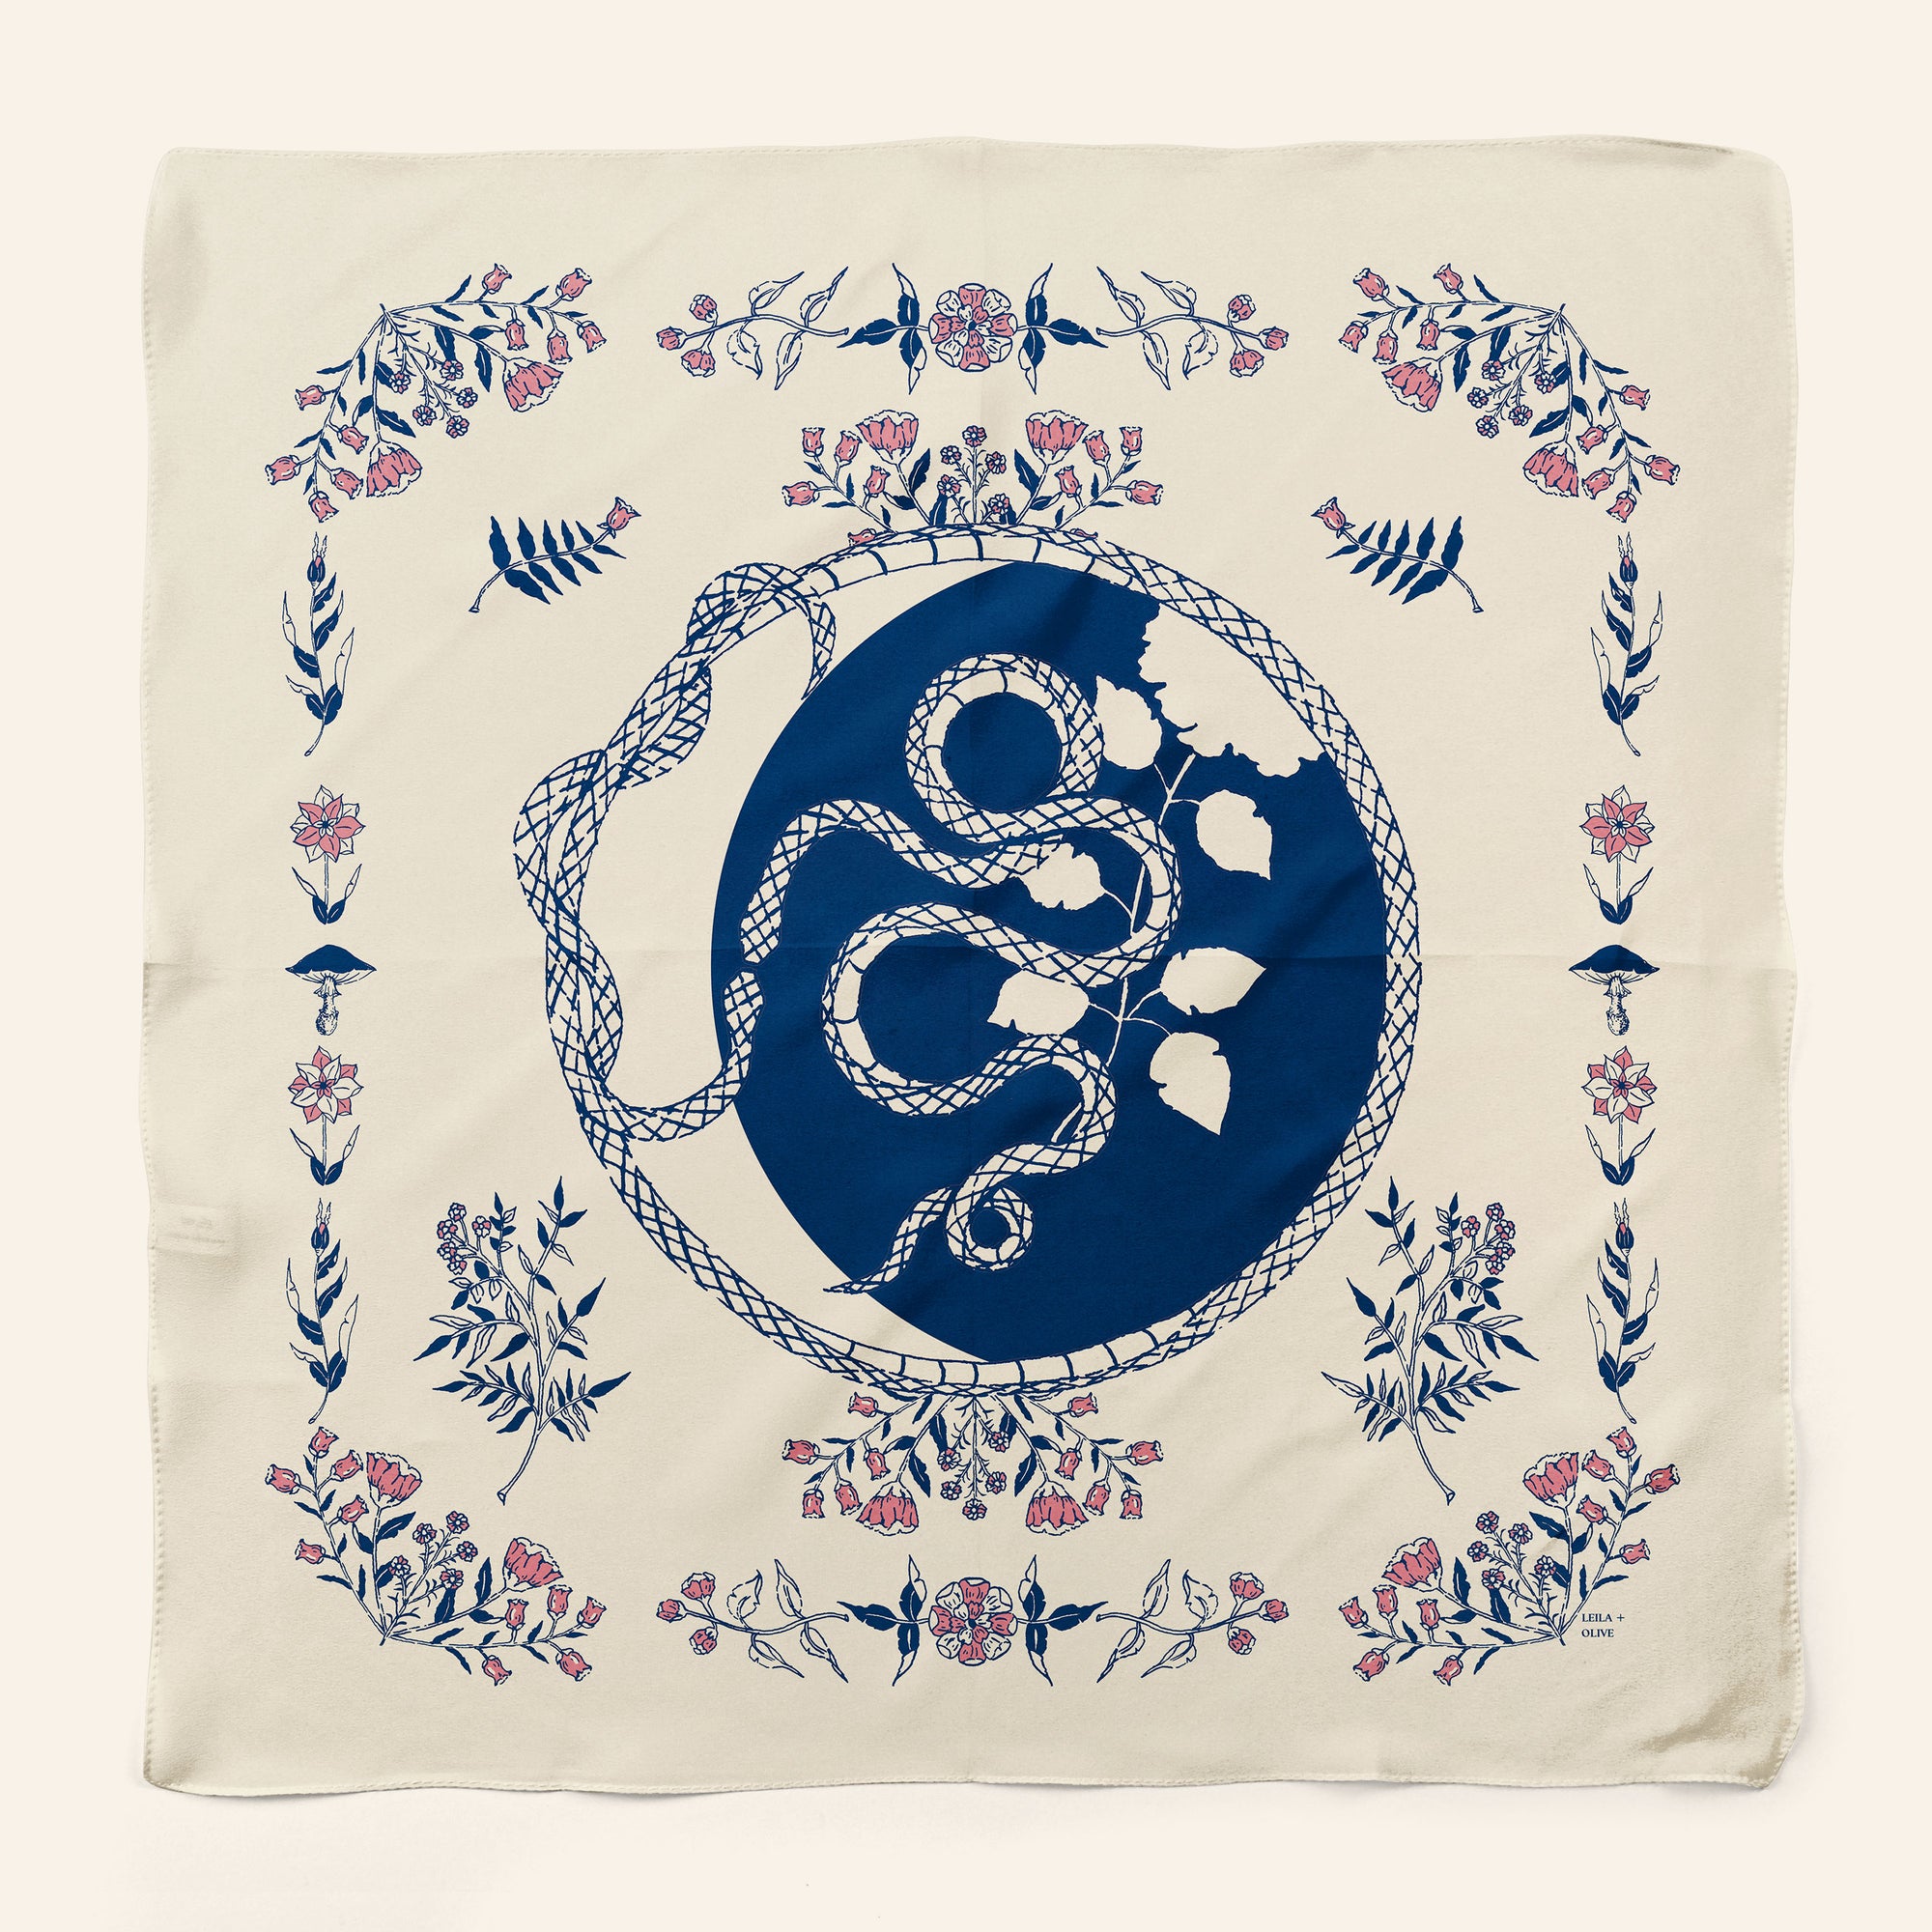 the lover's tarot cotton bandana and altar cloth, illustrated by hand and artisan printed with Indigo and Rose inks.